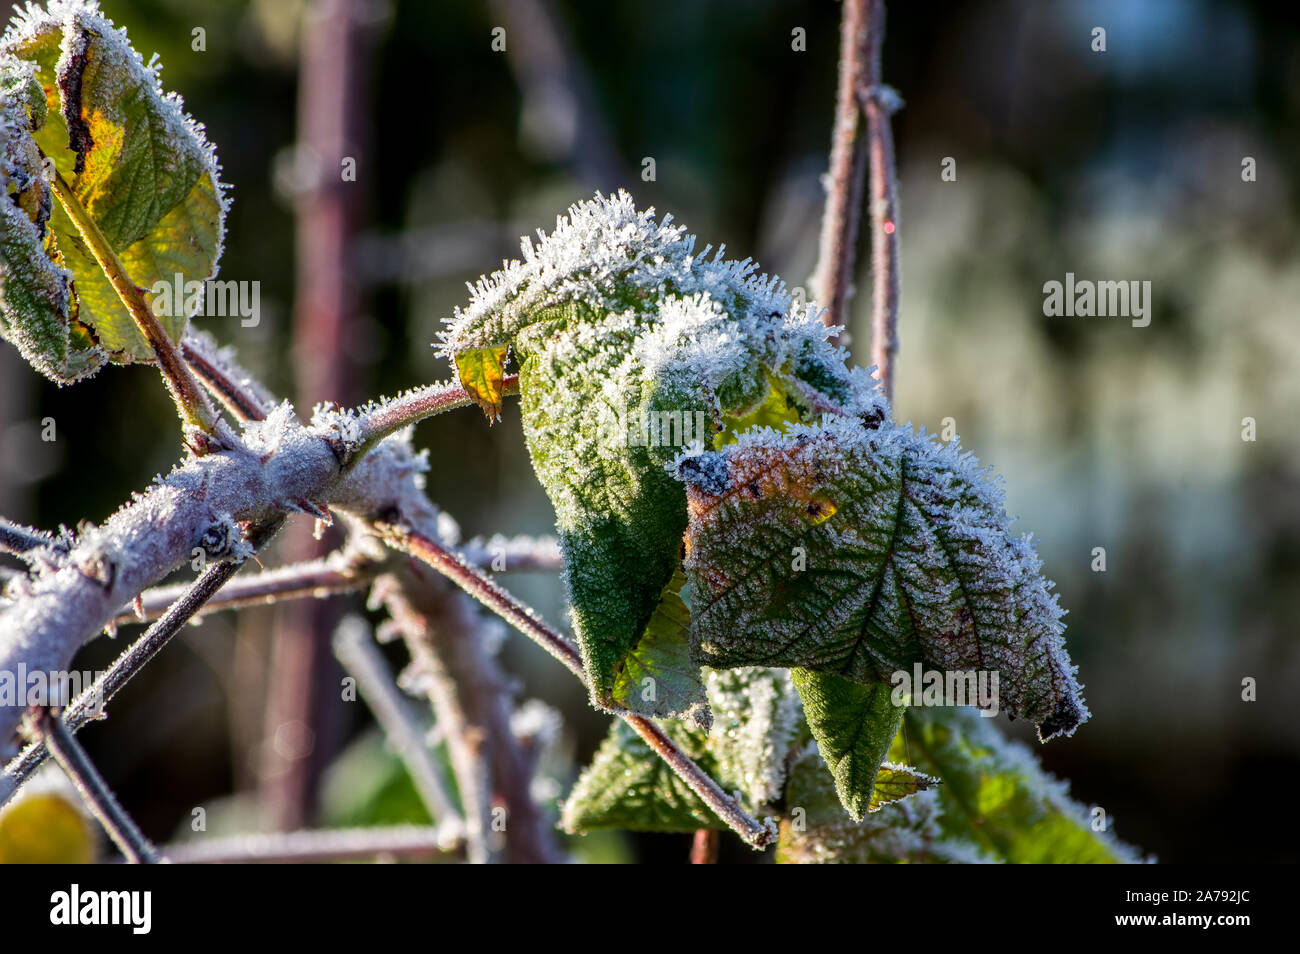 ice crystals of hoar frost on leaves of a raspberry bush in october in morning light Stock Photo